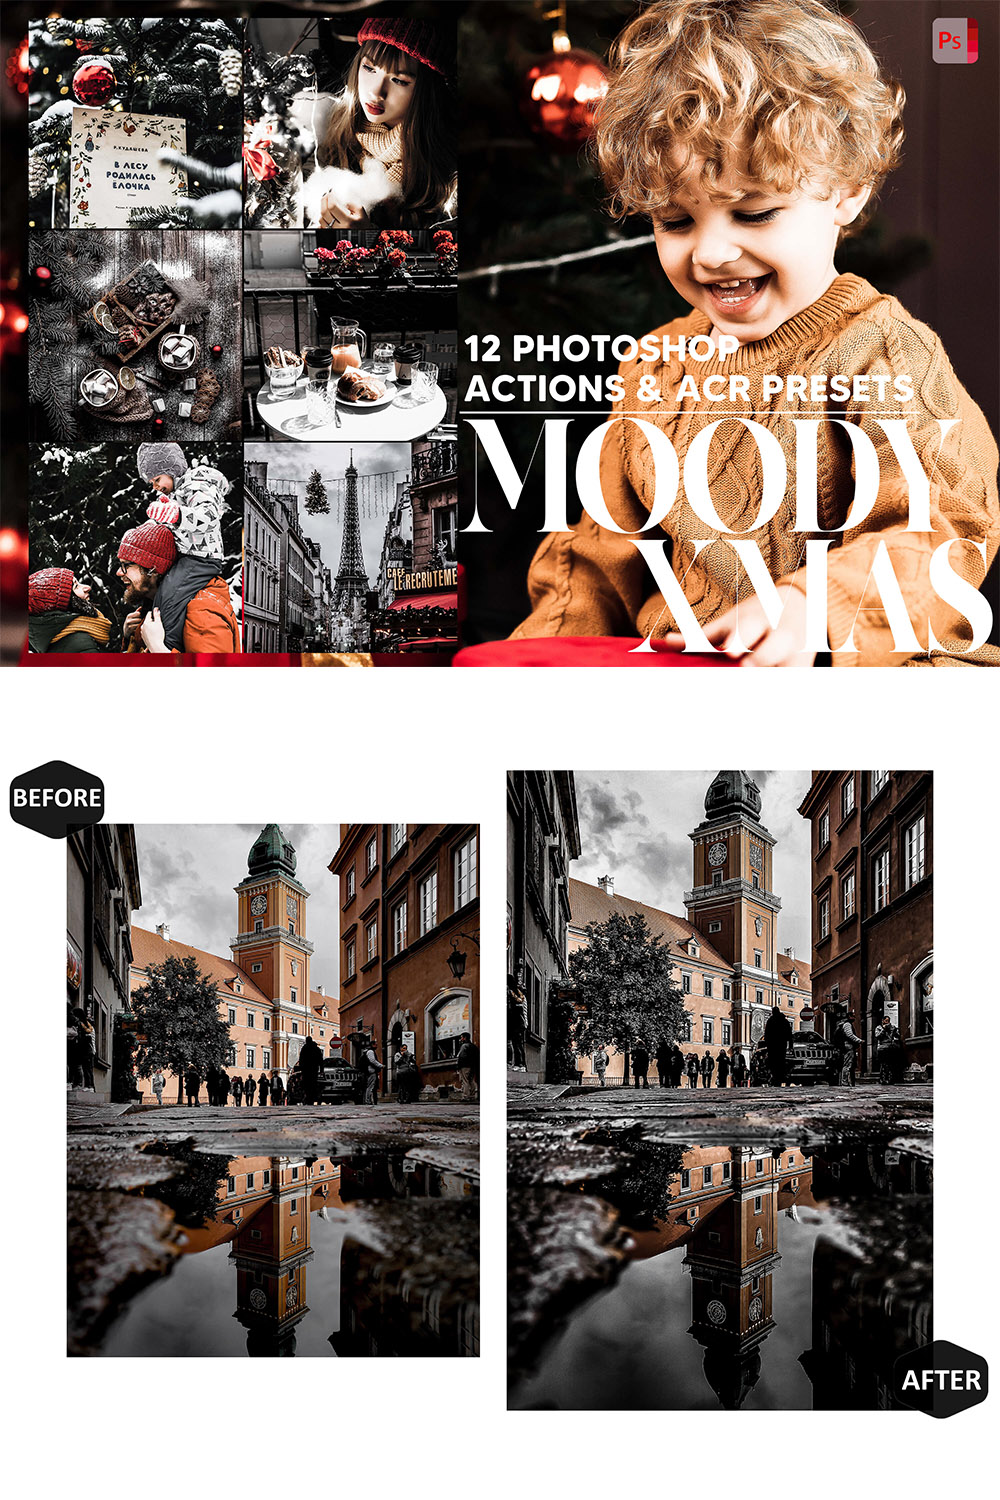 12 Photoshop Actions, Moody Xmas Ps Action, Christmas ACR Preset, Holiday Ps Filter, Atn Portrait And Lifestyle Theme For Instagram, Blogger pinterest preview image.